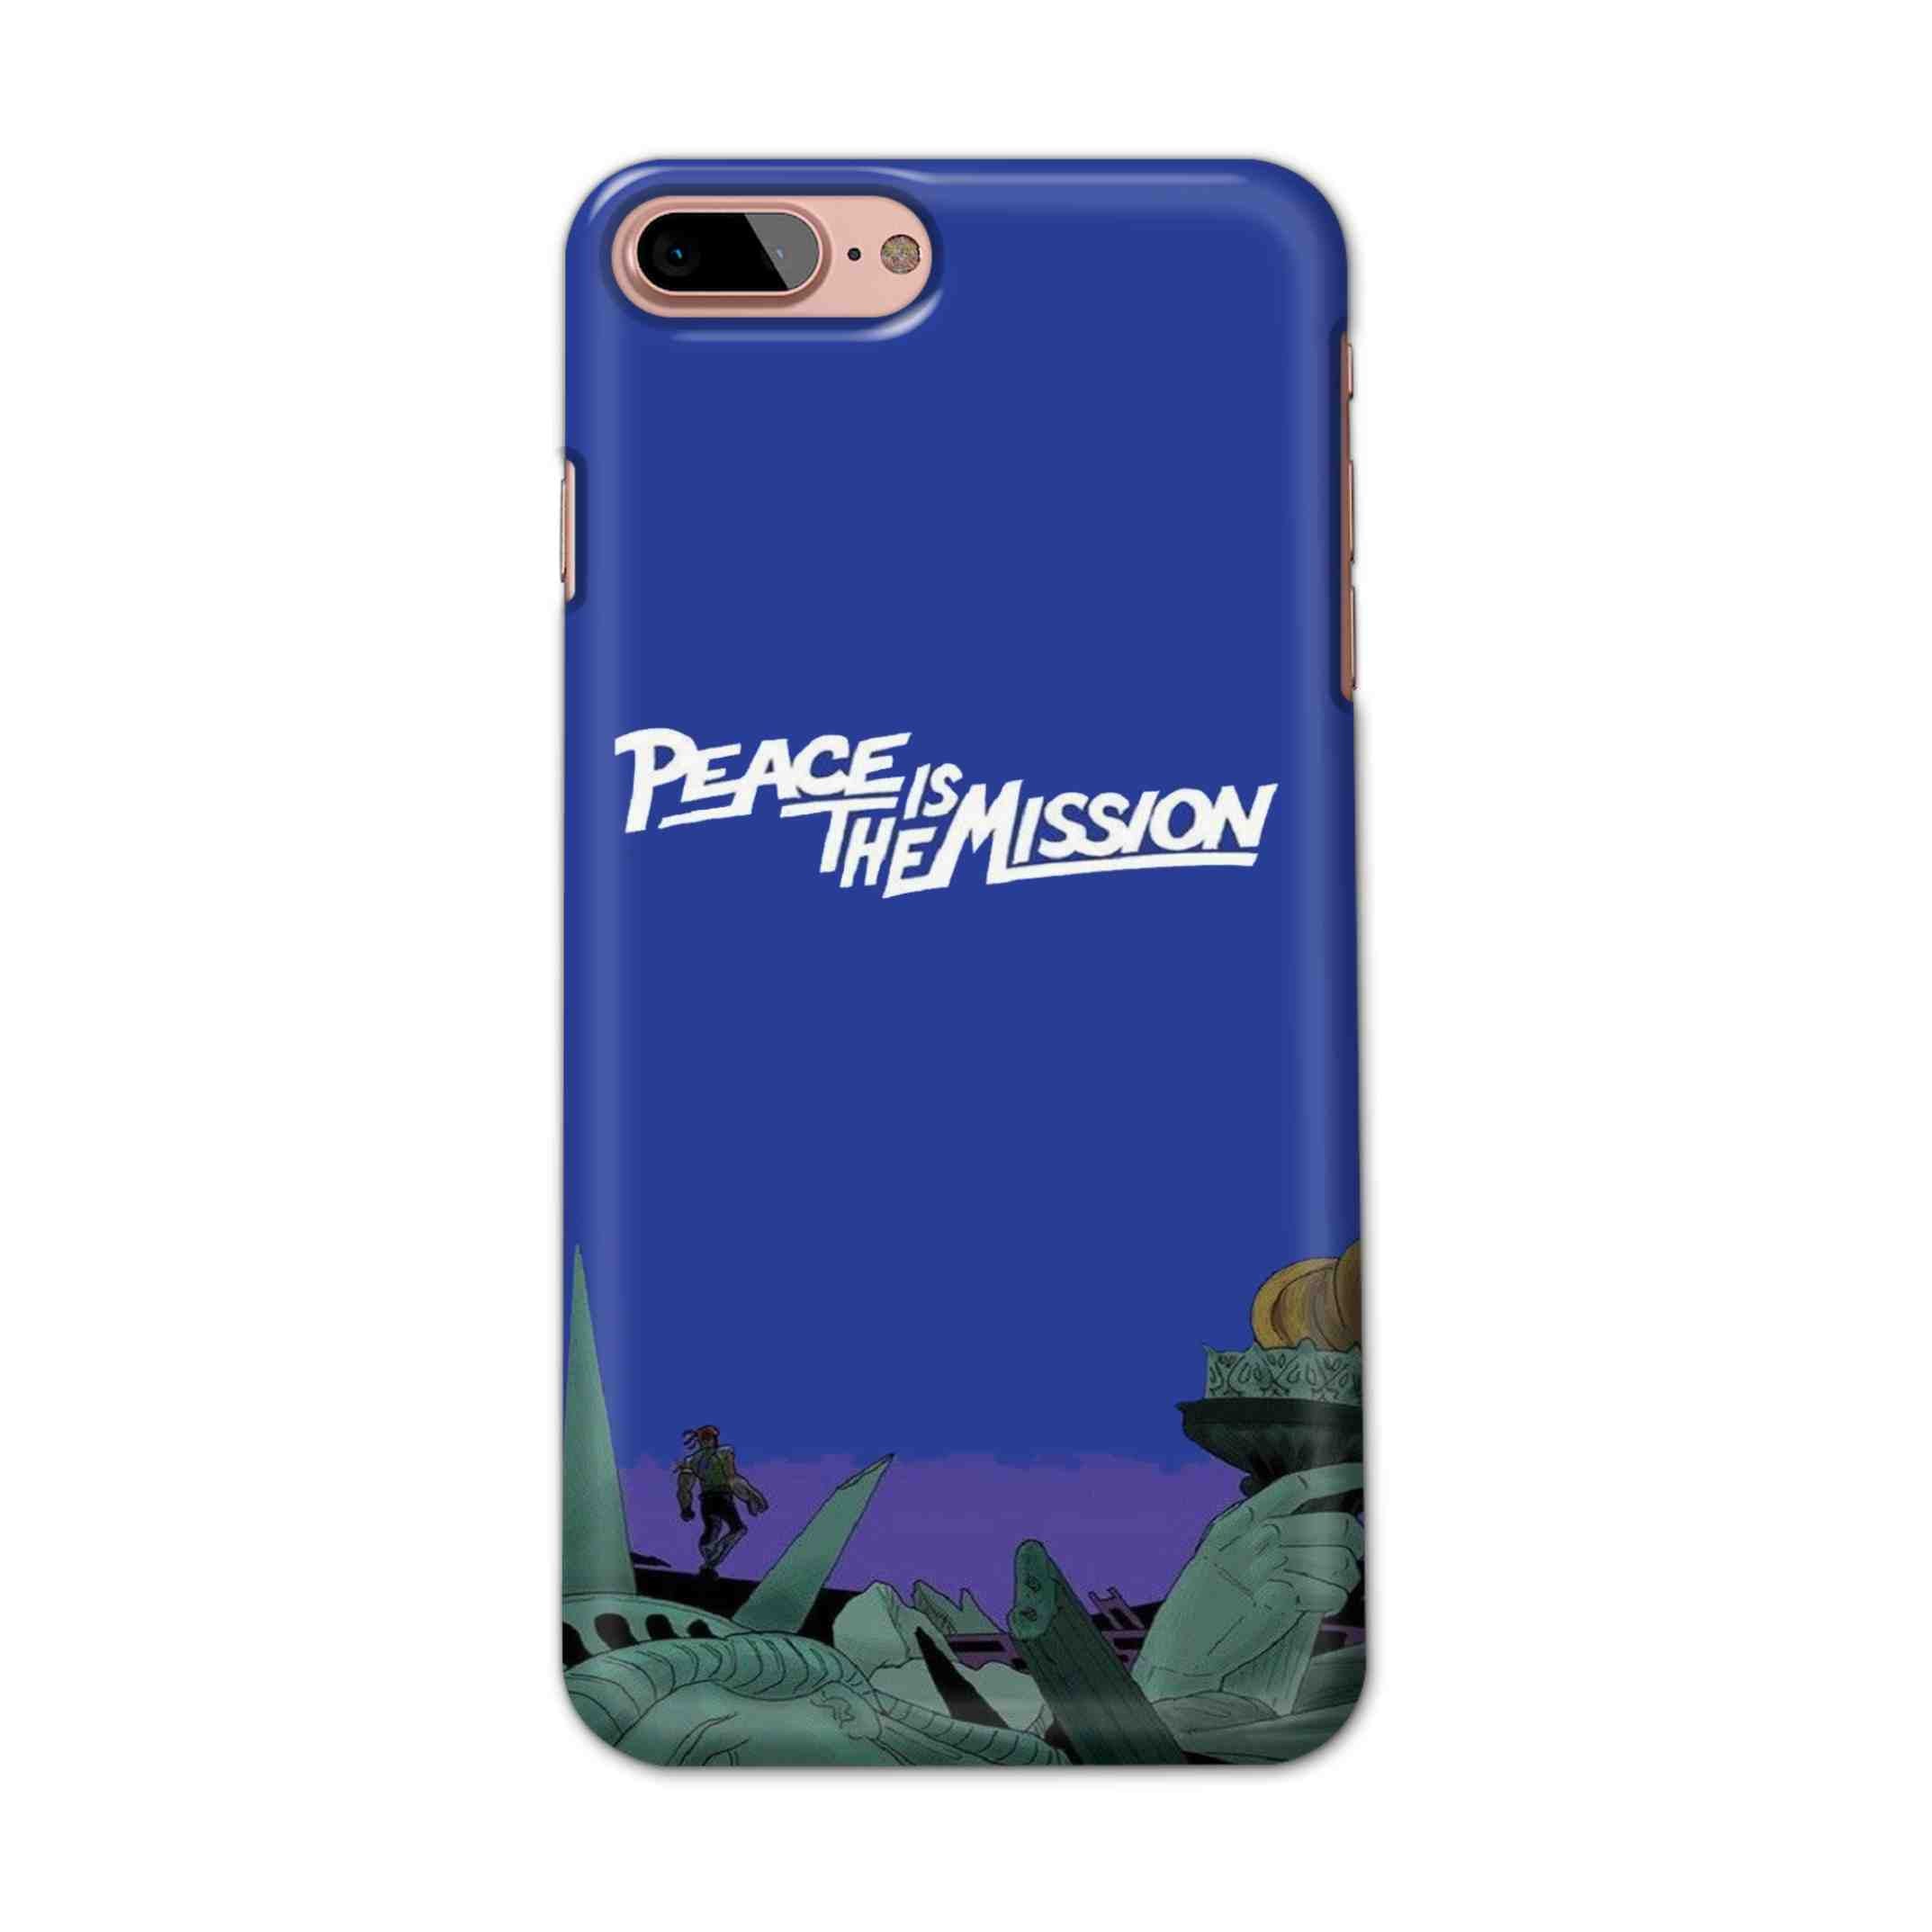 Buy Peace Is The Misson Hard Back Mobile Phone Case/Cover For iPhone 7 Plus / 8 Plus Online